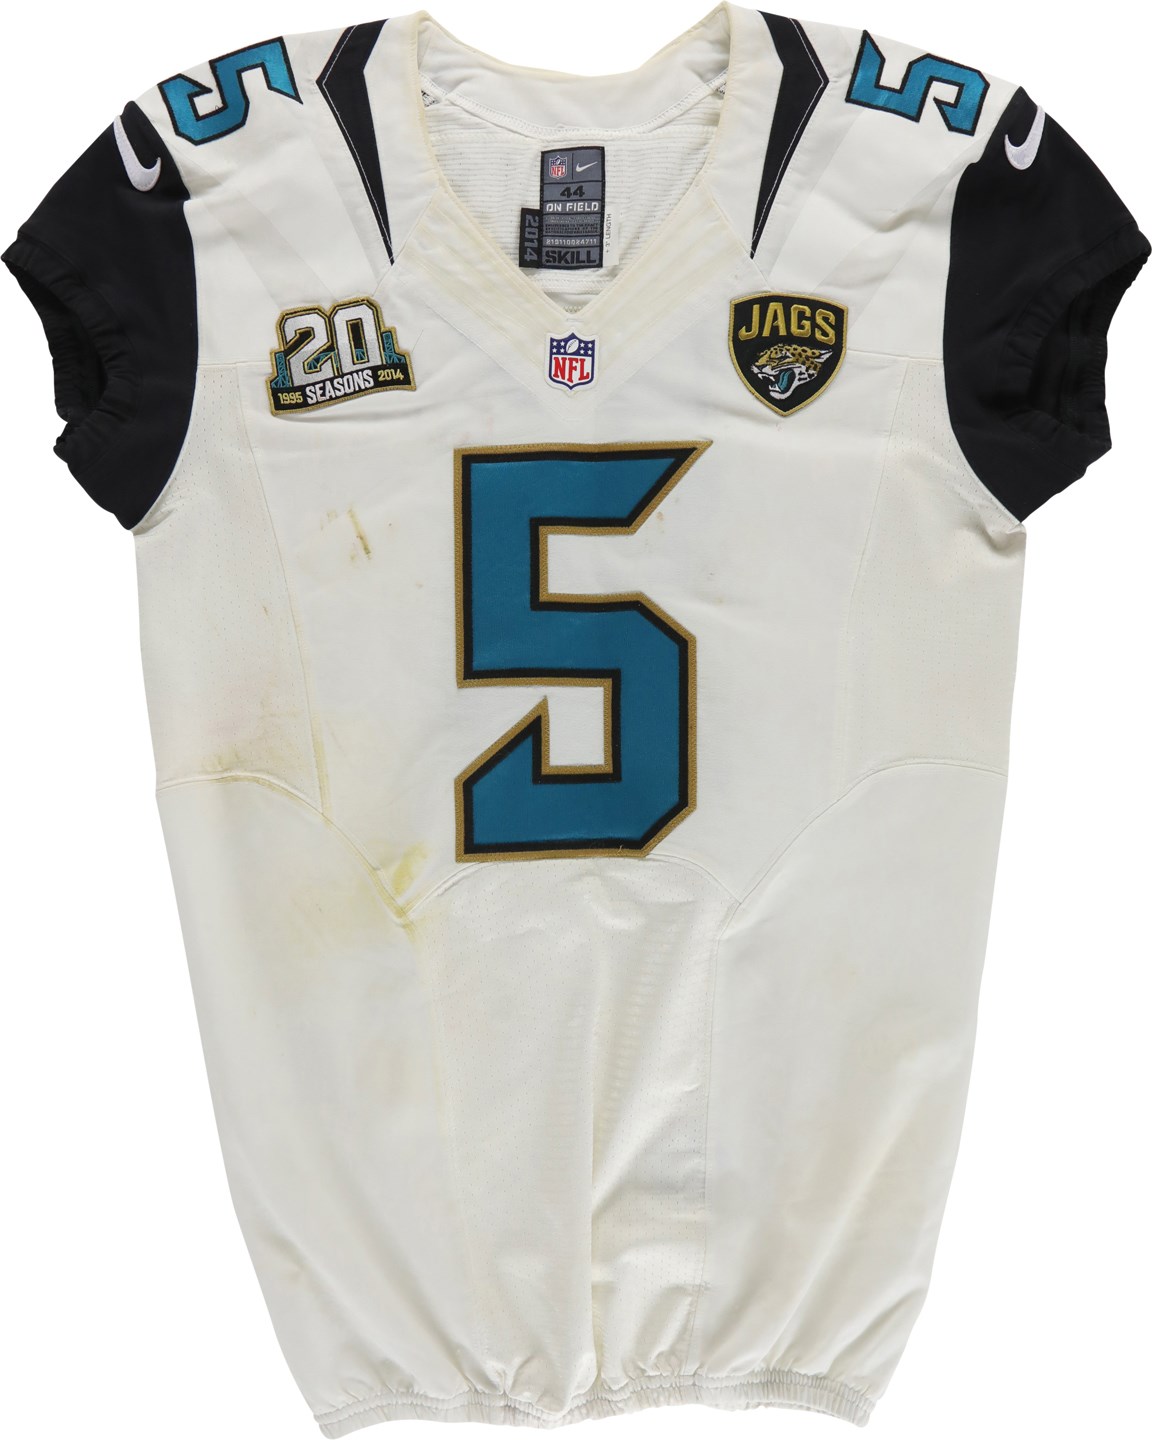 - 2014 Blake Bortles Professional Debut Jacksonville Jaguars Signed Game Worn Jersey (Photo-Matched to Two Games)